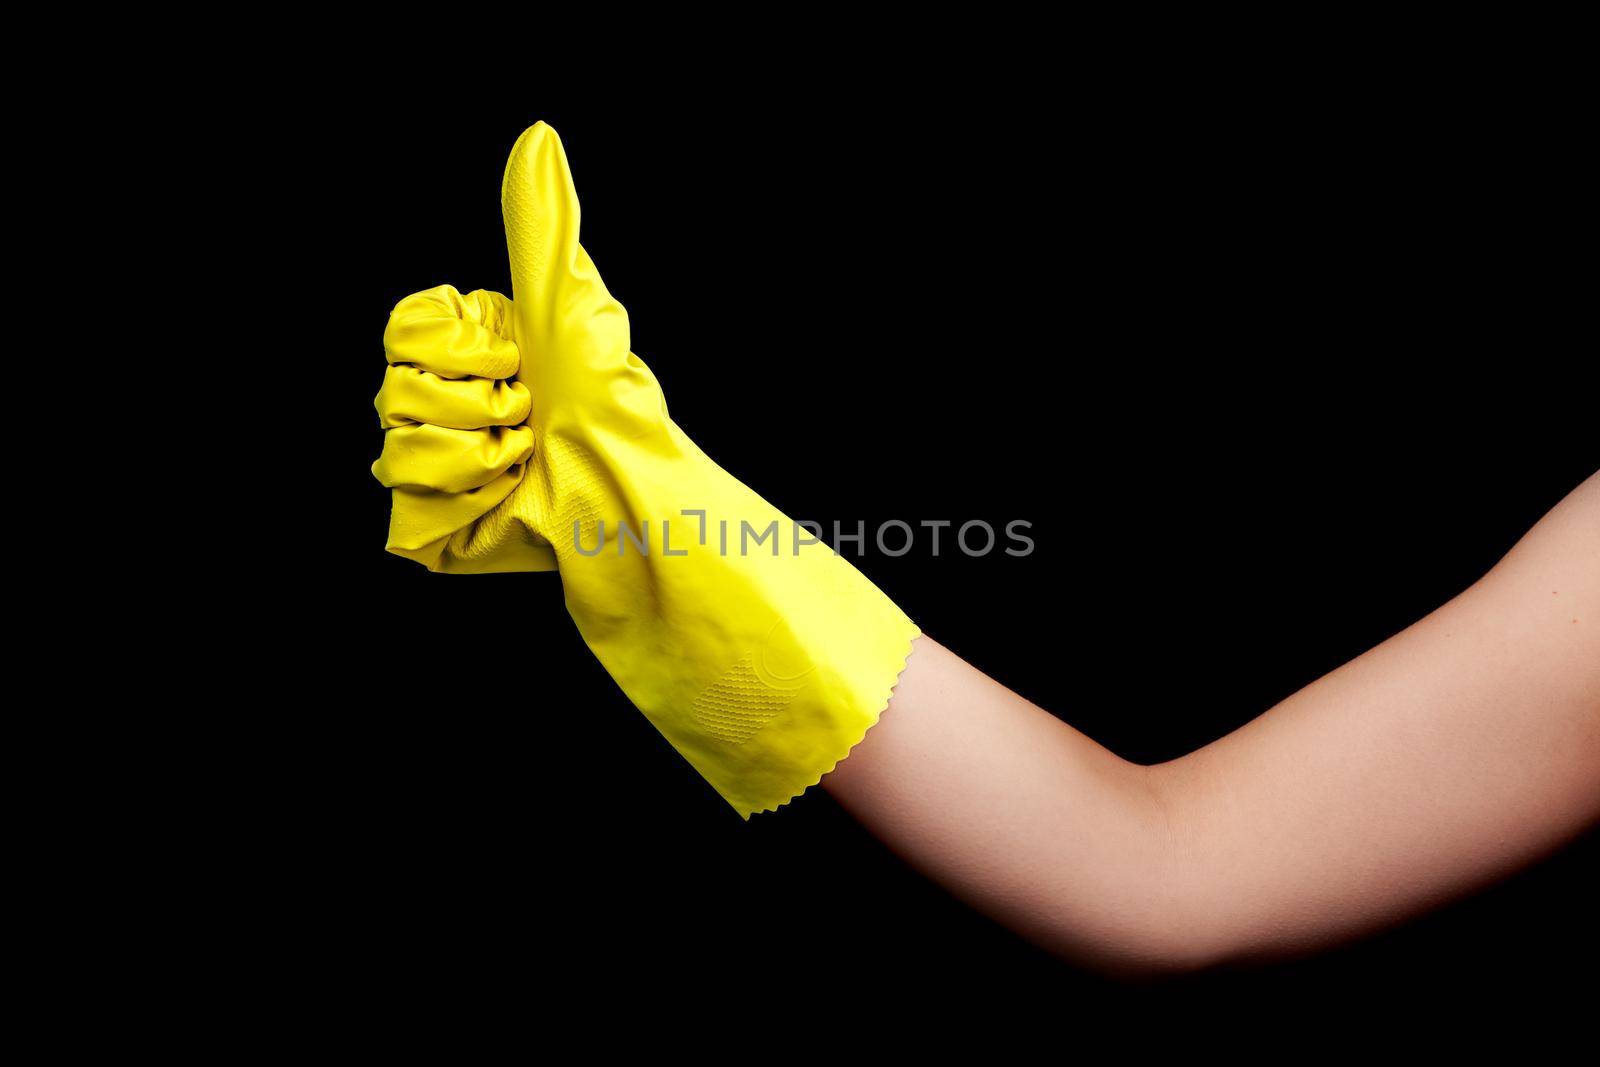 hand in yellow protective glove for cleaning making thumbs up gesture by kokimk